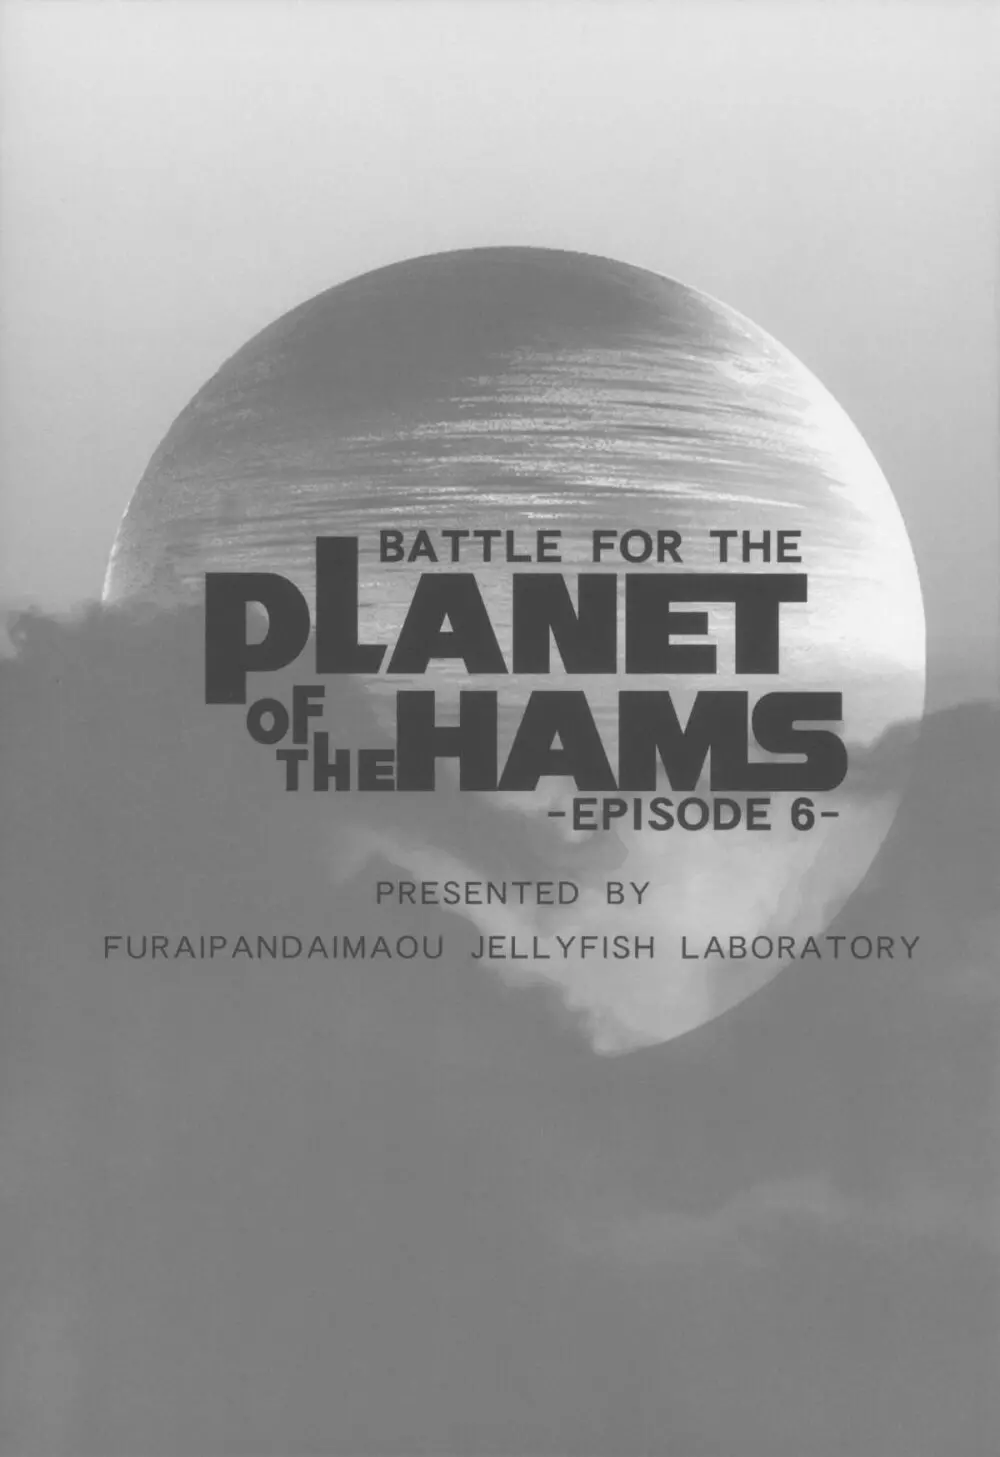 BATTLE FOR THE PLANET OF THE HAMS -EPISODE 6- 3ページ